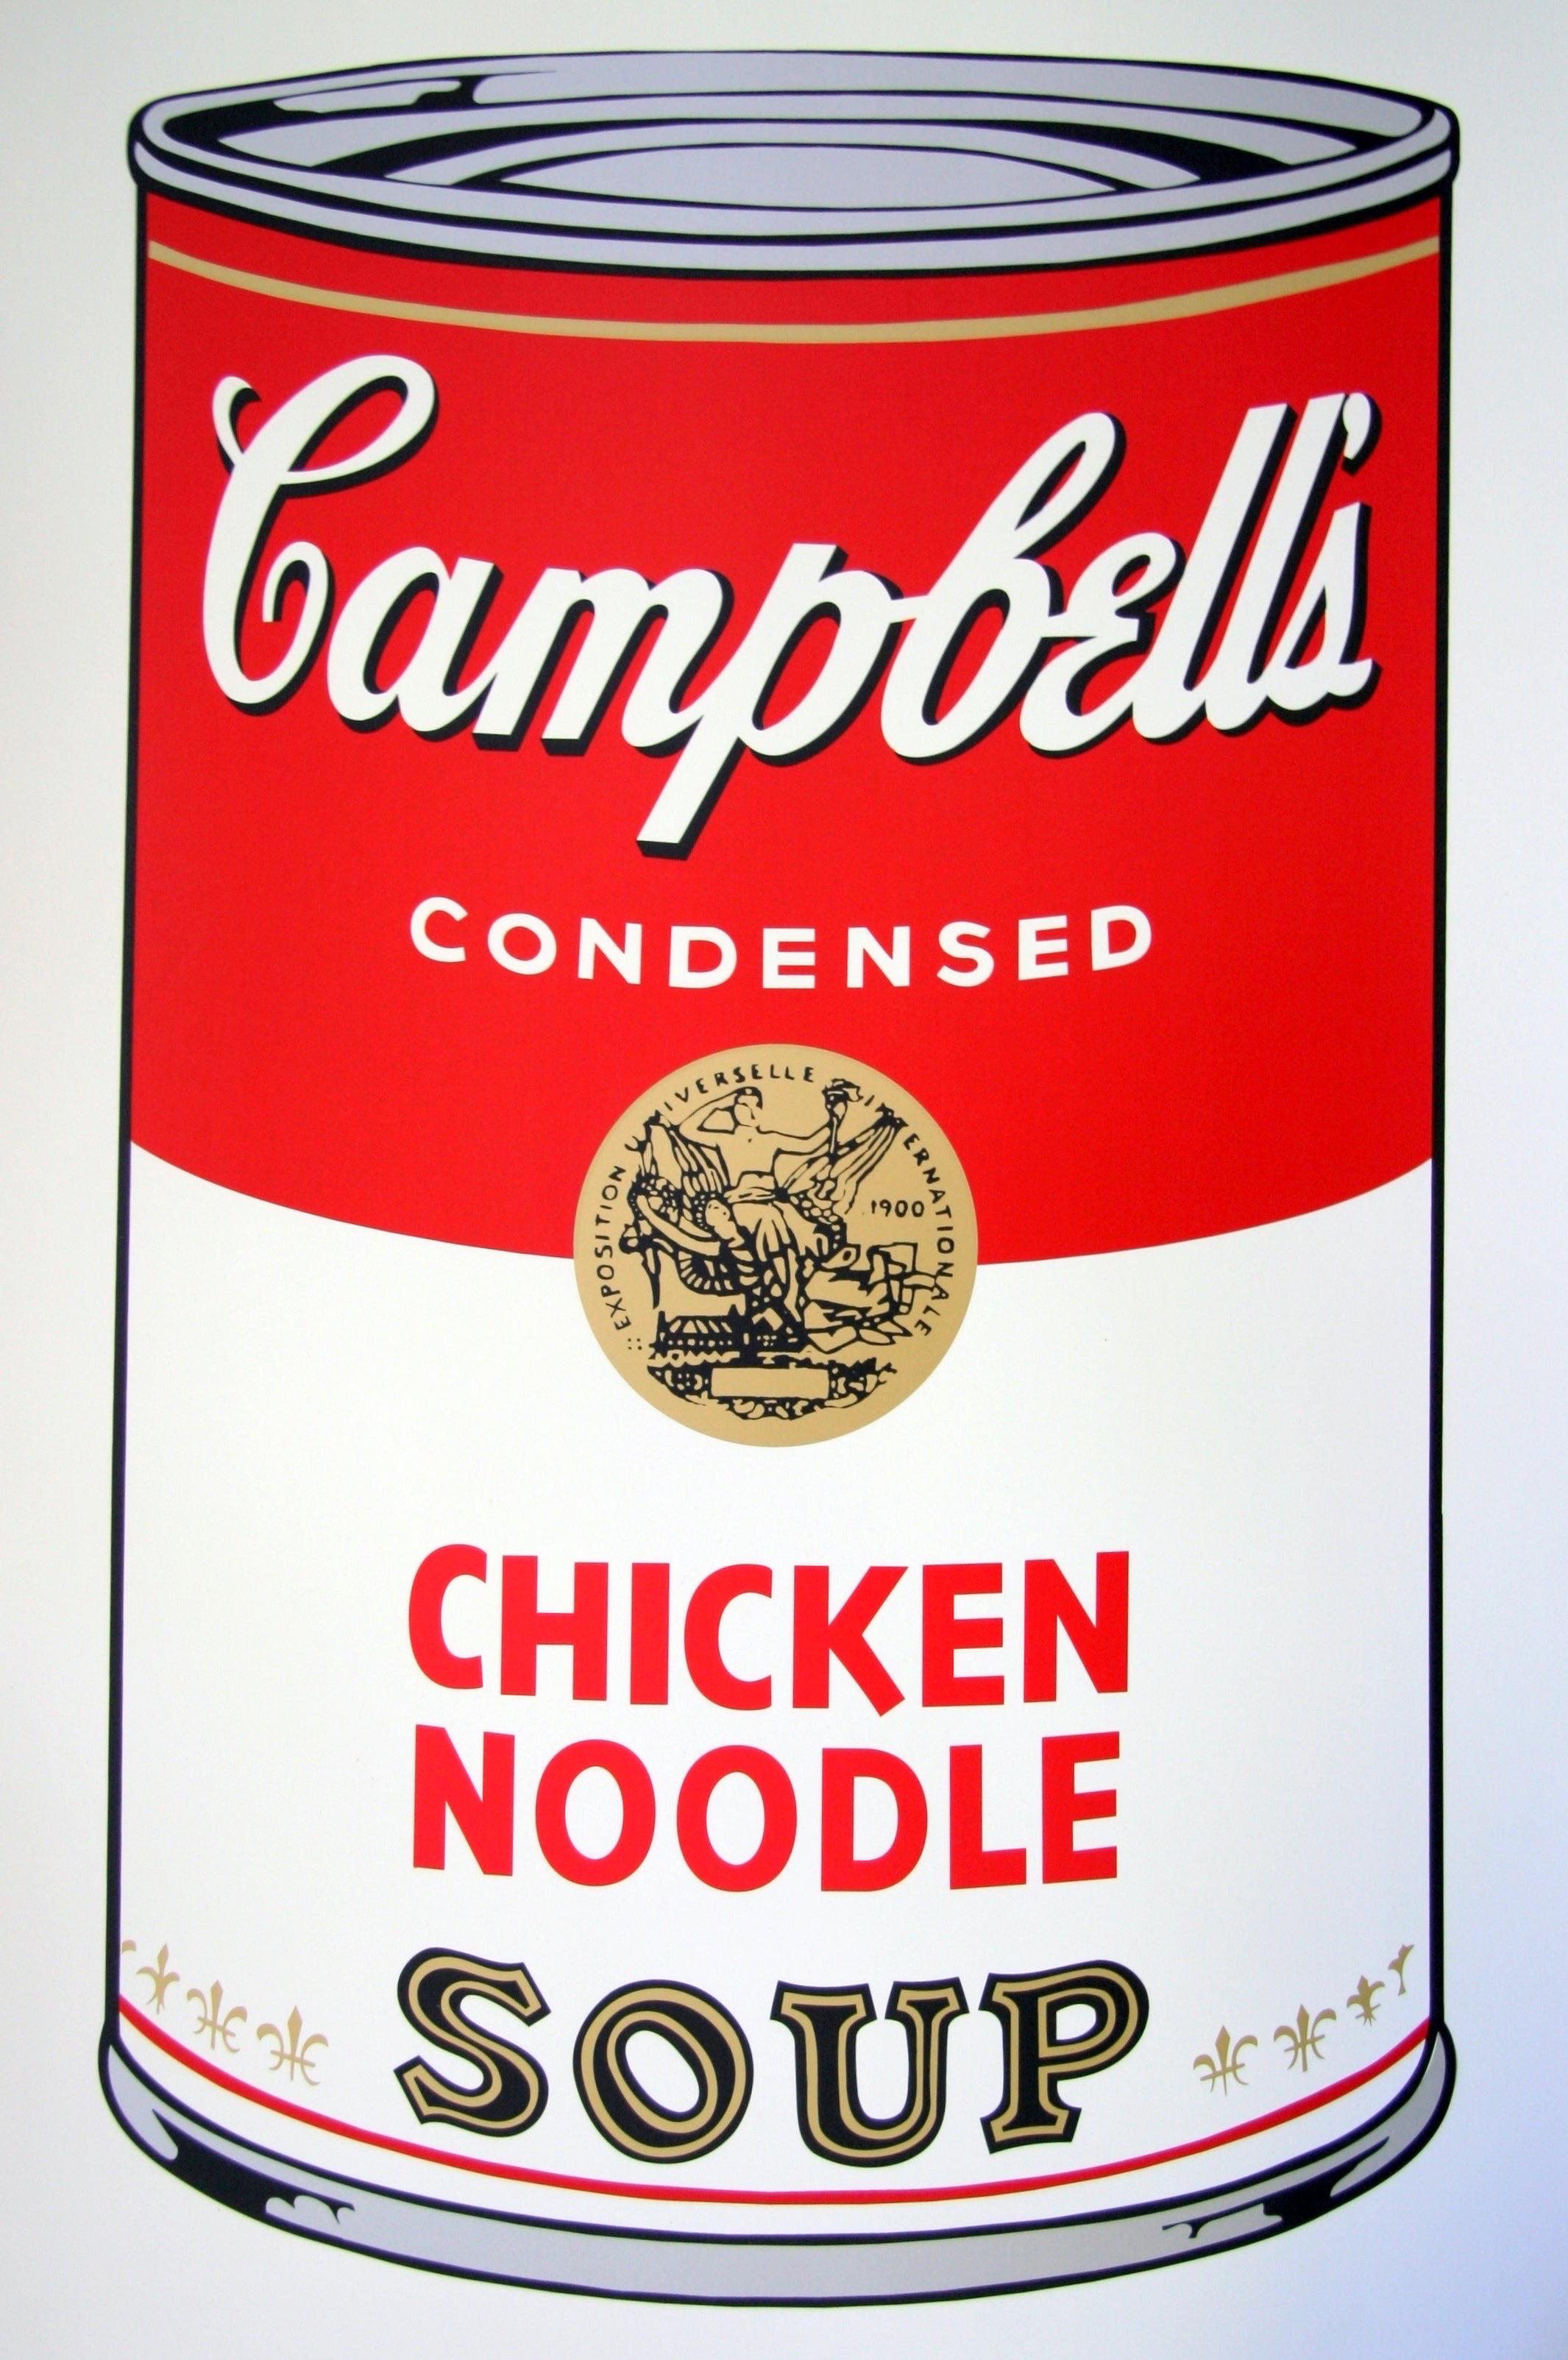 Sunday B. Morning (Andy Warhol), Campbells Chicken Noodle Soup   

Silkscreen print from photo negatives of original Factory Additions stencil on museum quality board. Printed with the highest quality archival inks

Open edition

89 x 58 cm  35.03 x